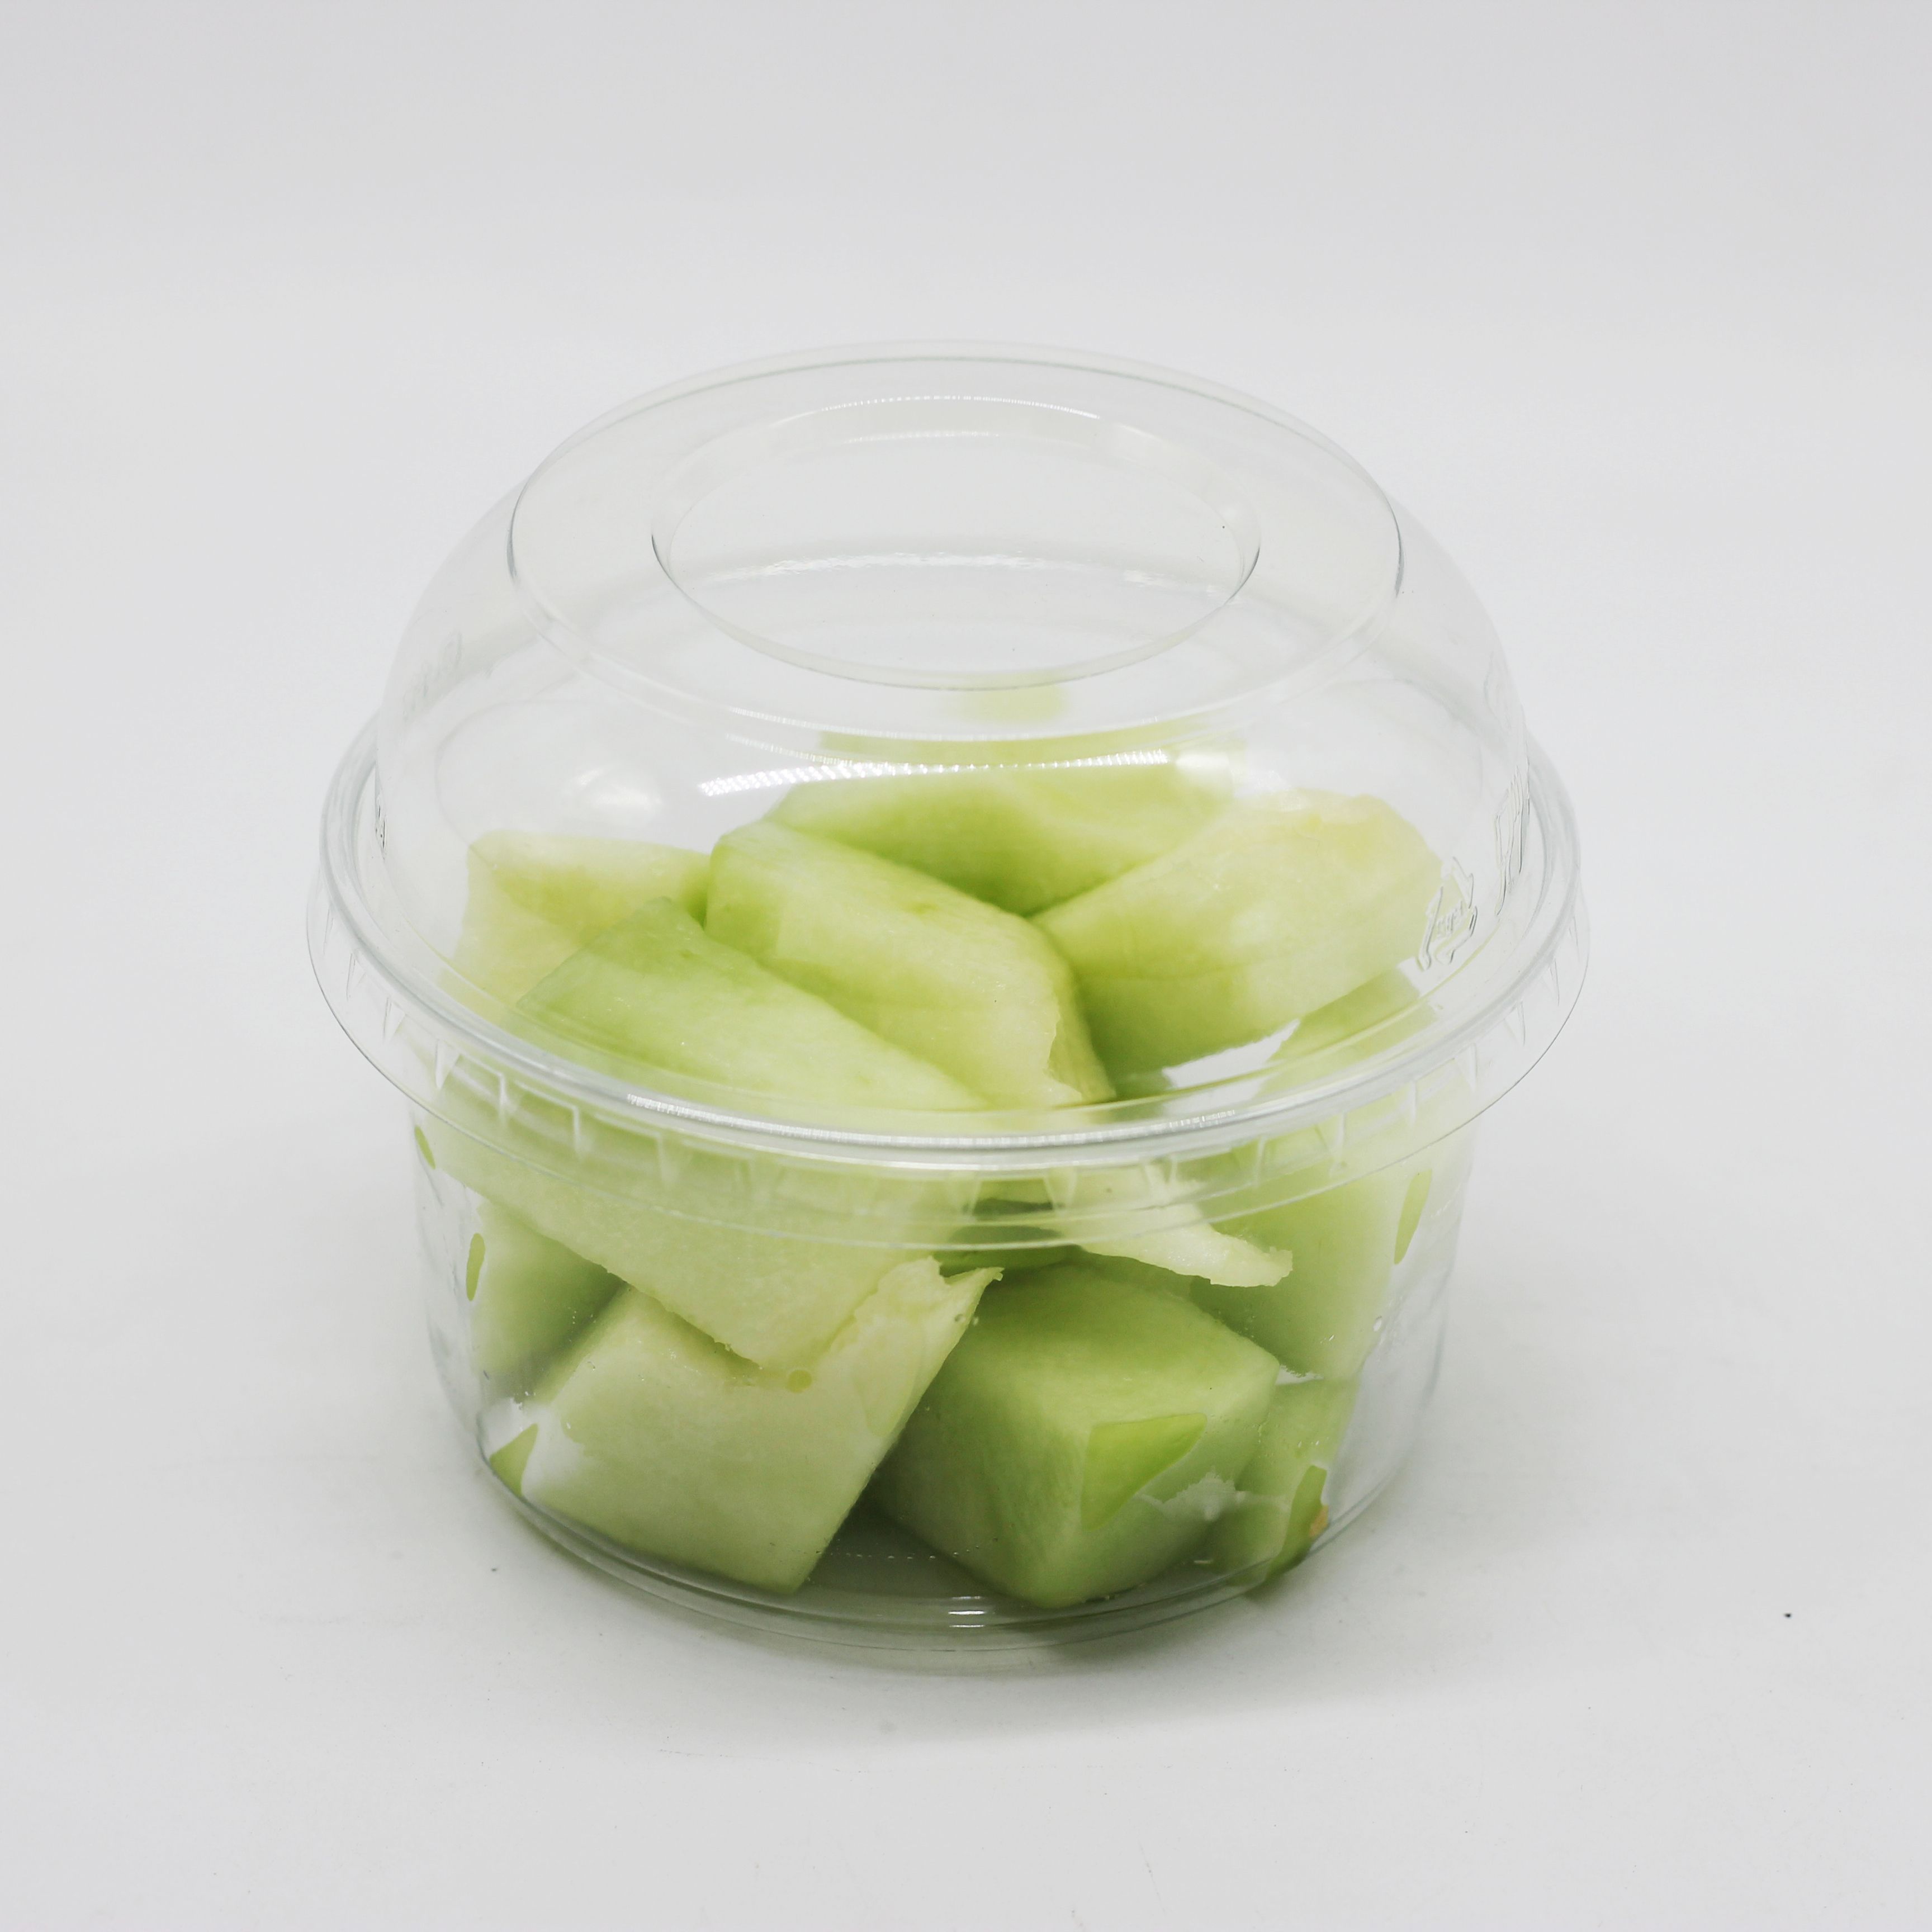 16oz Clear Disposable Cups 580ml Plastic Bowls with lid for Fruits Yoghurt Salad Smoothie Nuts Dessert